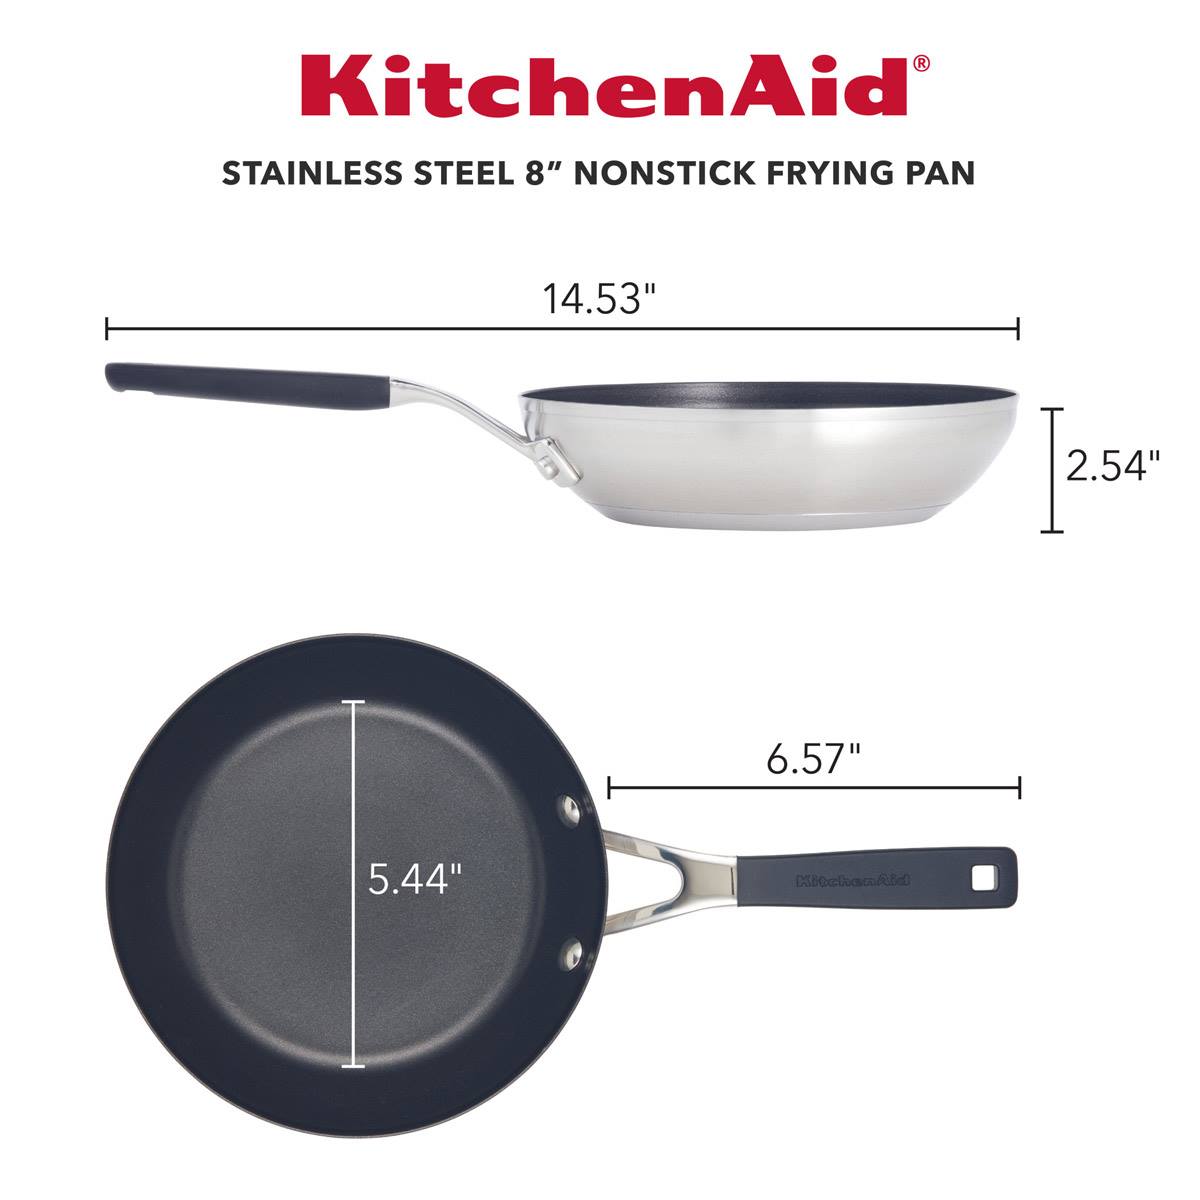 KitchenAid(R) 8in. Stainless Steel Nonstick Frying Pan